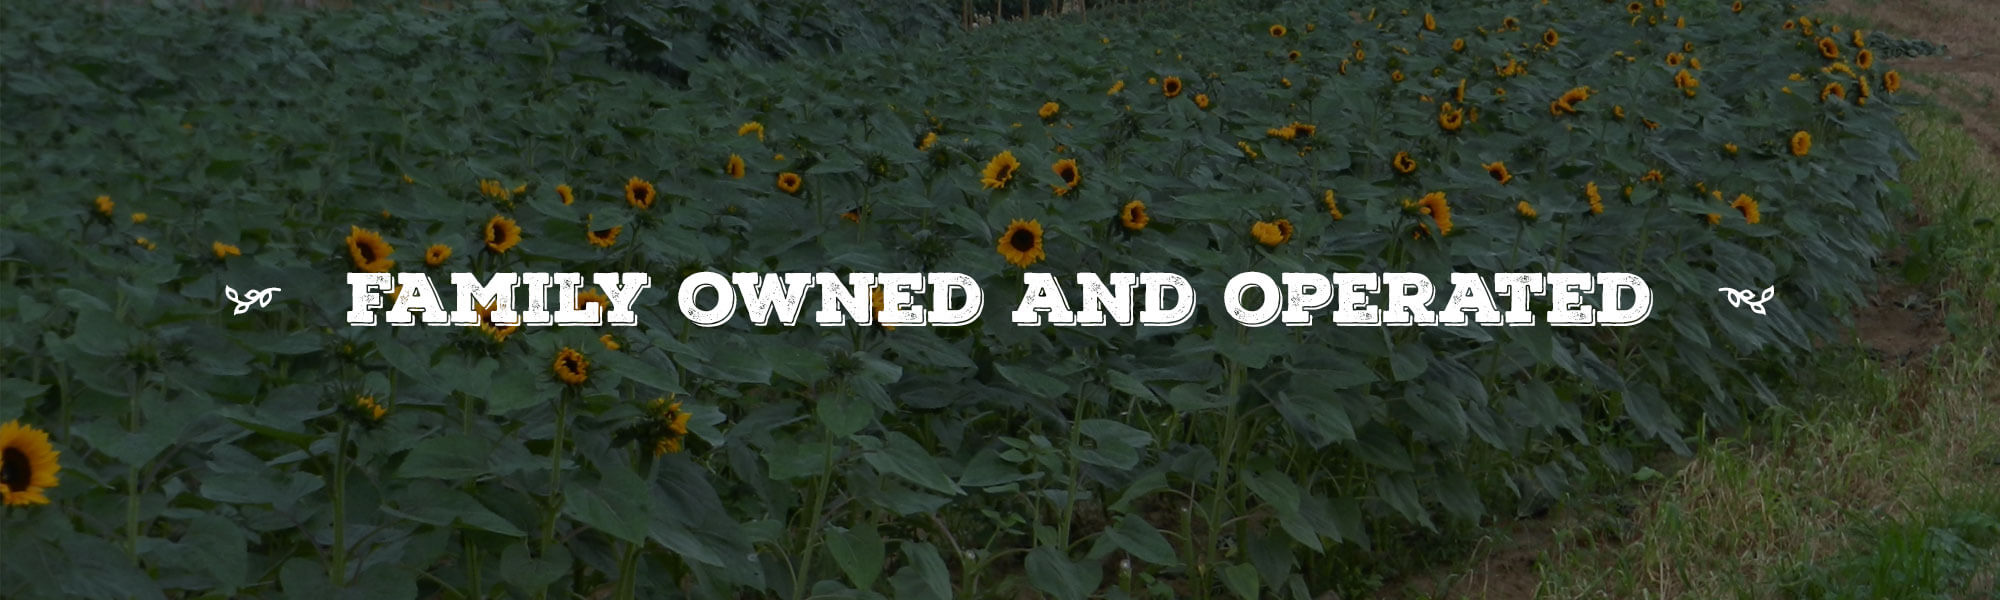 Family Owned and Operated overlay on image of Sunflower field